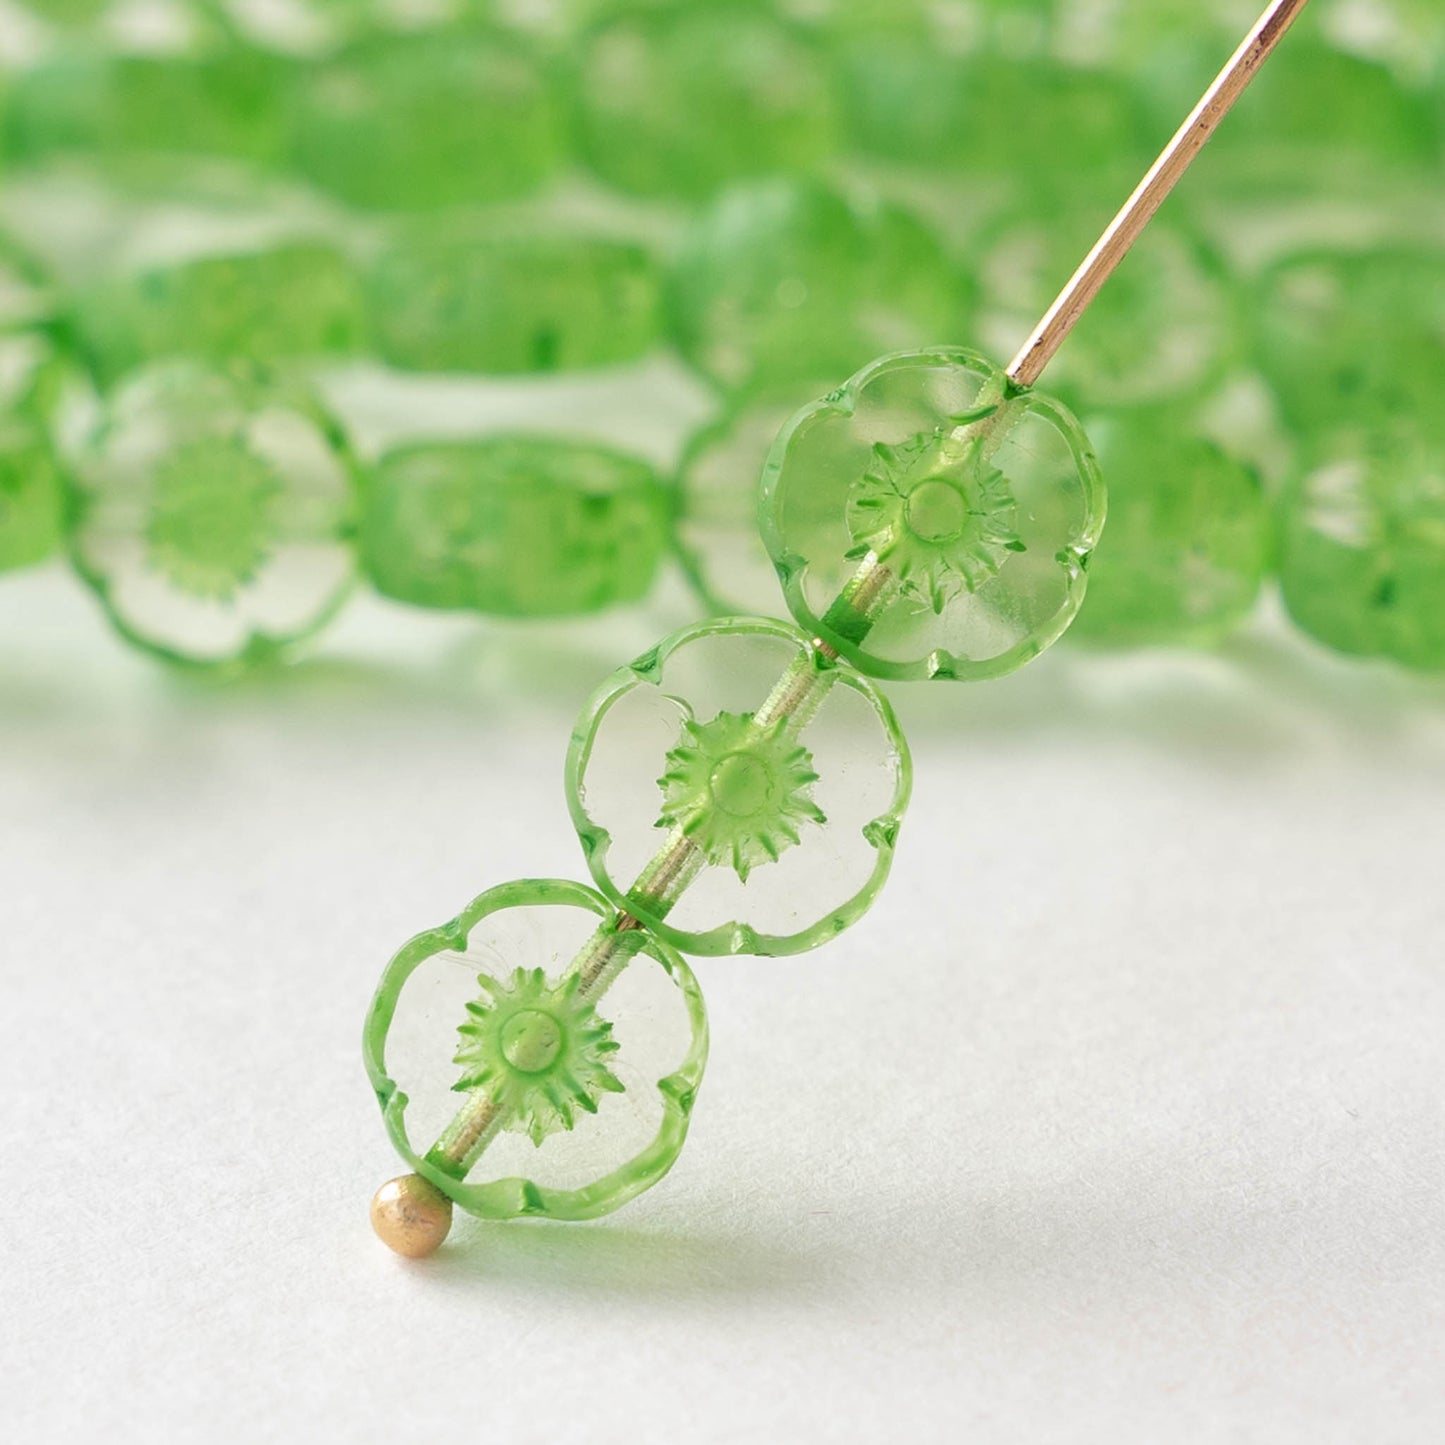 8mm Flower Beads - Crystal with Green -20 Beads